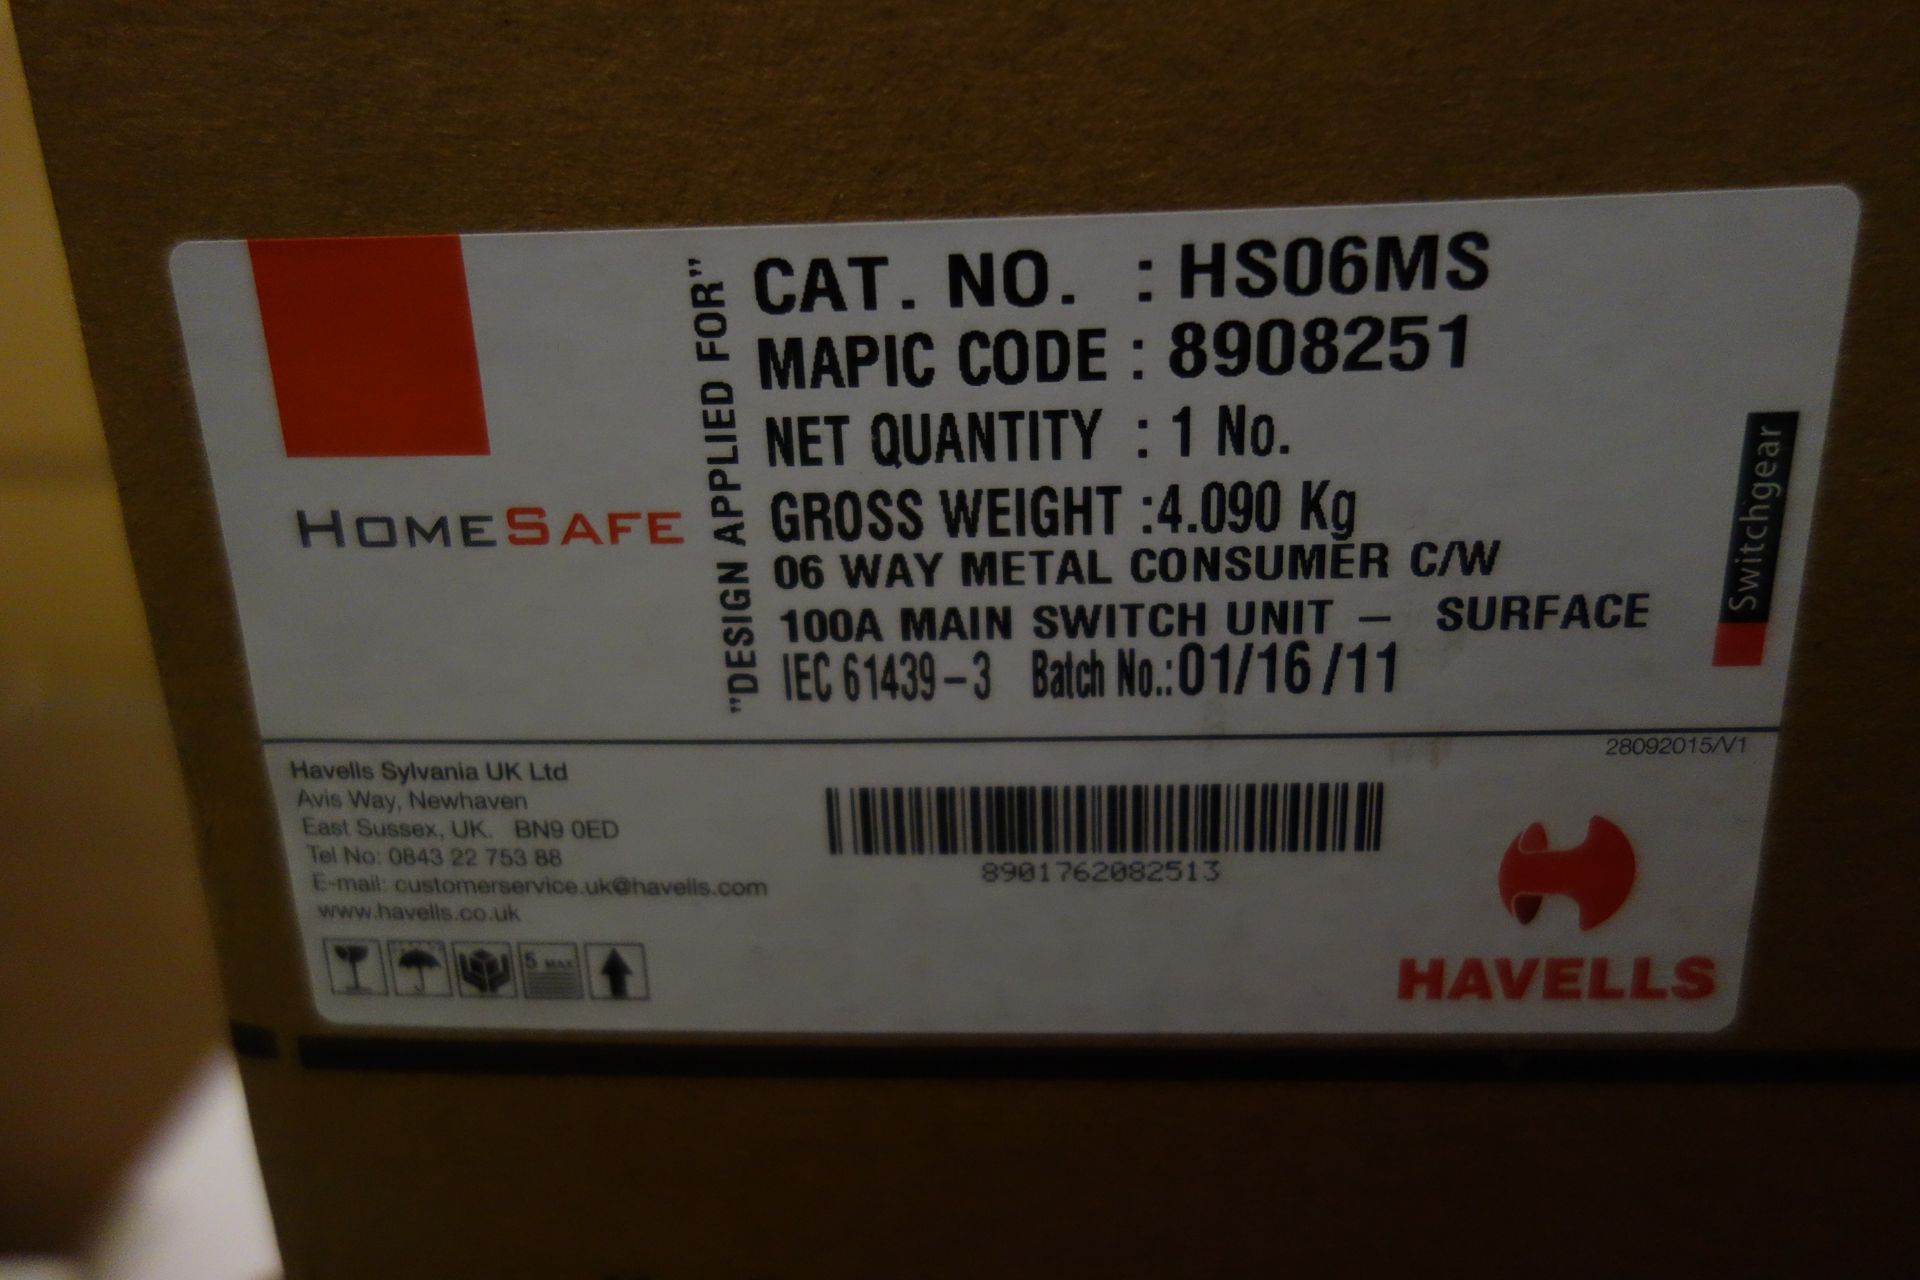 3 X Havells HS06MS 06 Way Metal Consumer C/W 100A Main Switch Unit - Image 2 of 2